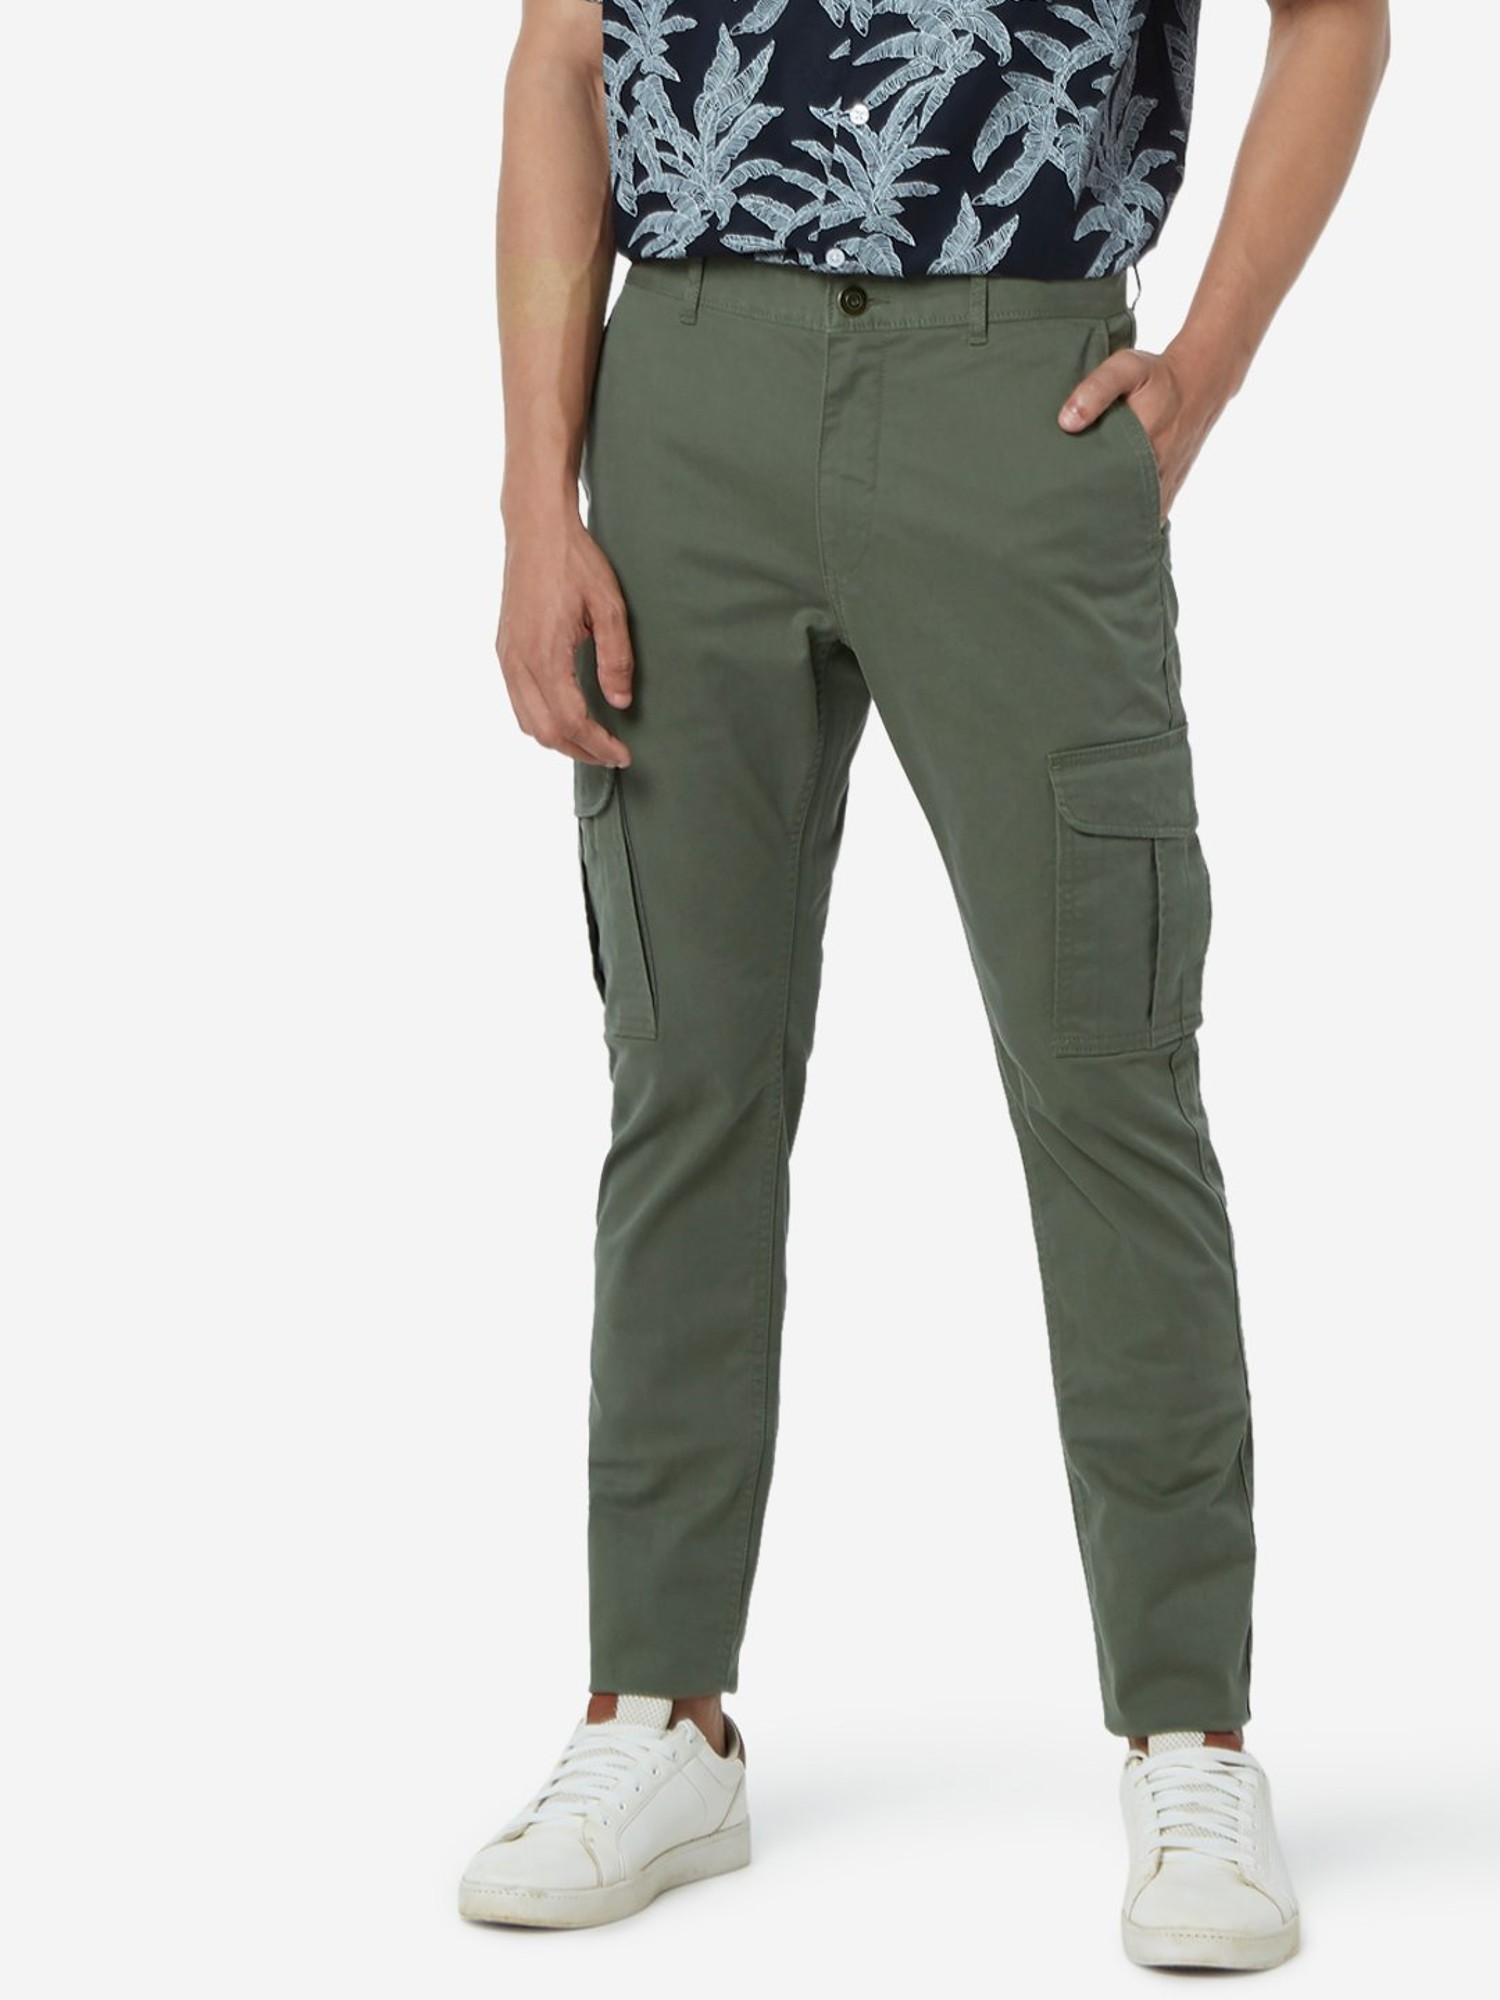 IHDR-502-OLV - 11oz Cotton Whipcord Cargo Pants - Olive | James Dant